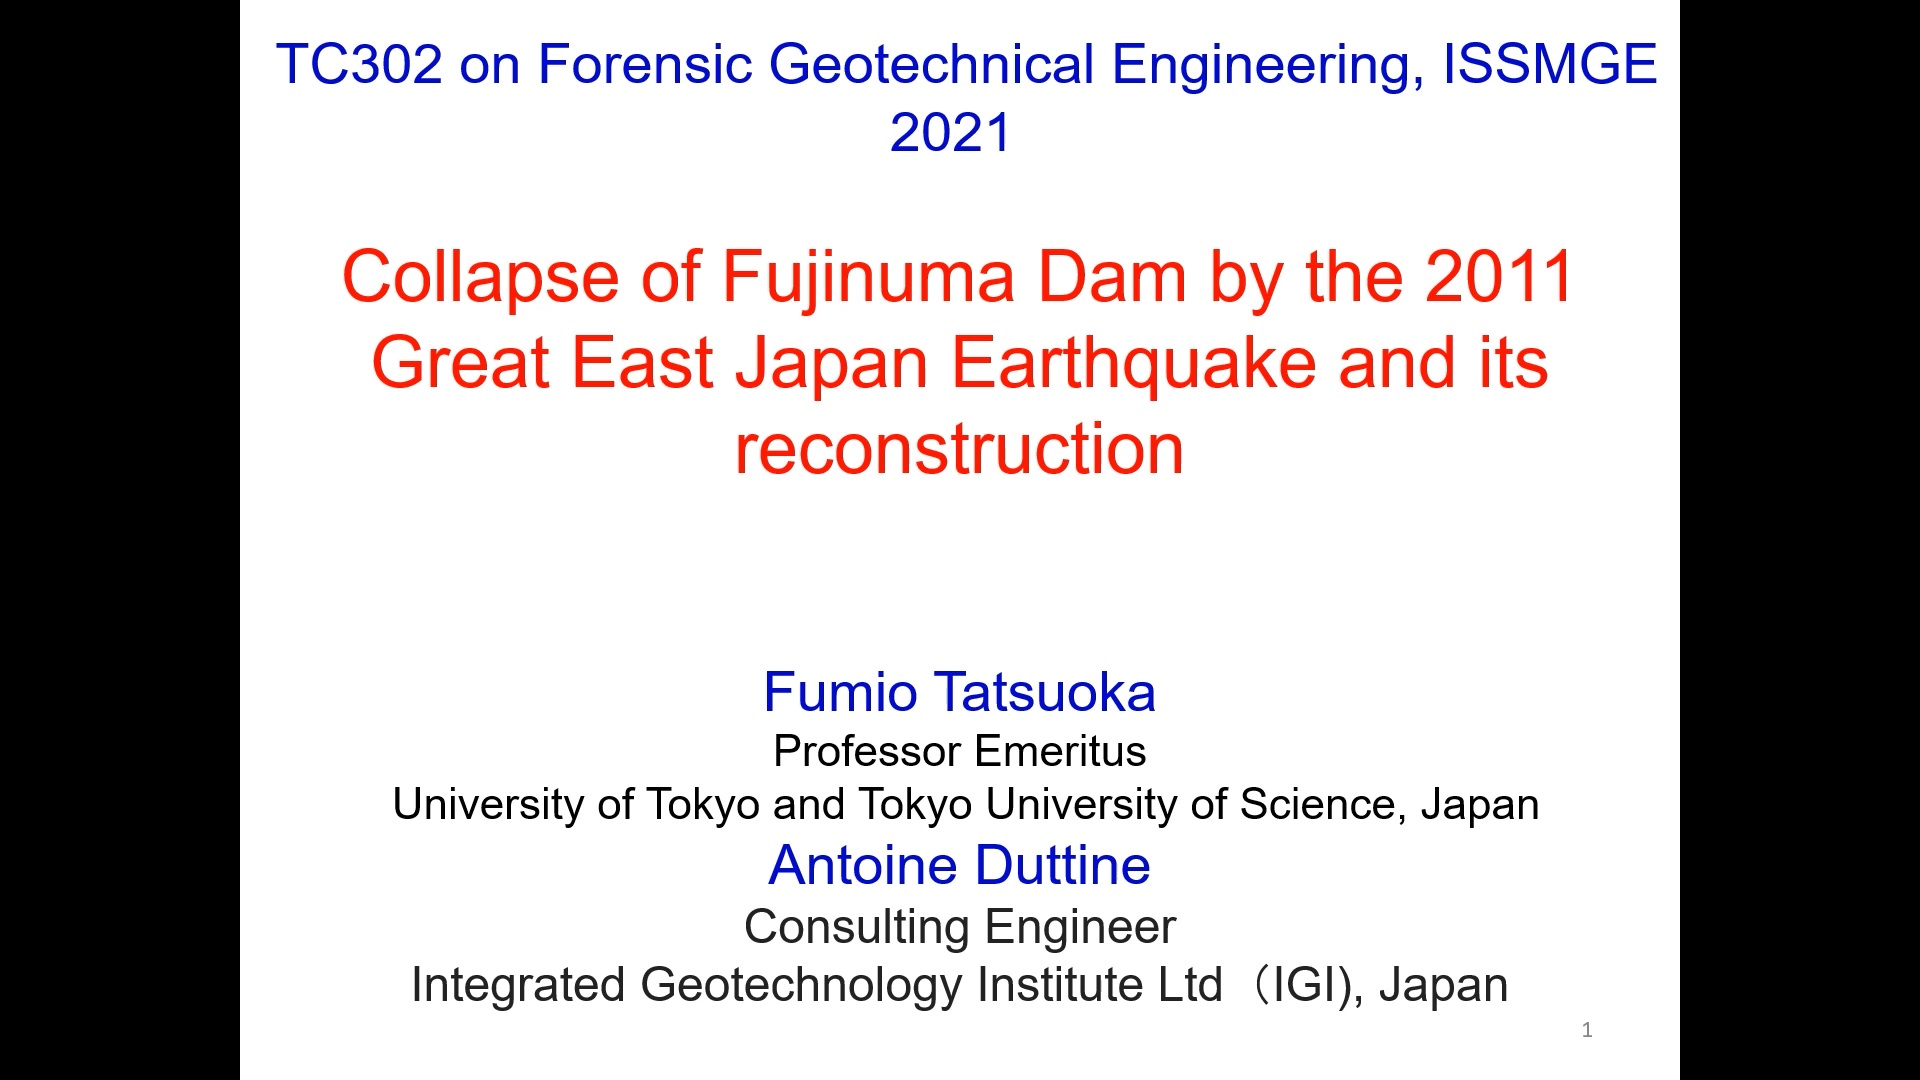 Collapse of Fujinuma Dam by the 2011 Great East Japan Earthquake and its reconstruction {"category":"webinar","subjects":["Earth Retaining Structures"],"number":"TC302-01","instructors":["Fumio Tatsuoka", "Antoine Duttine"]}